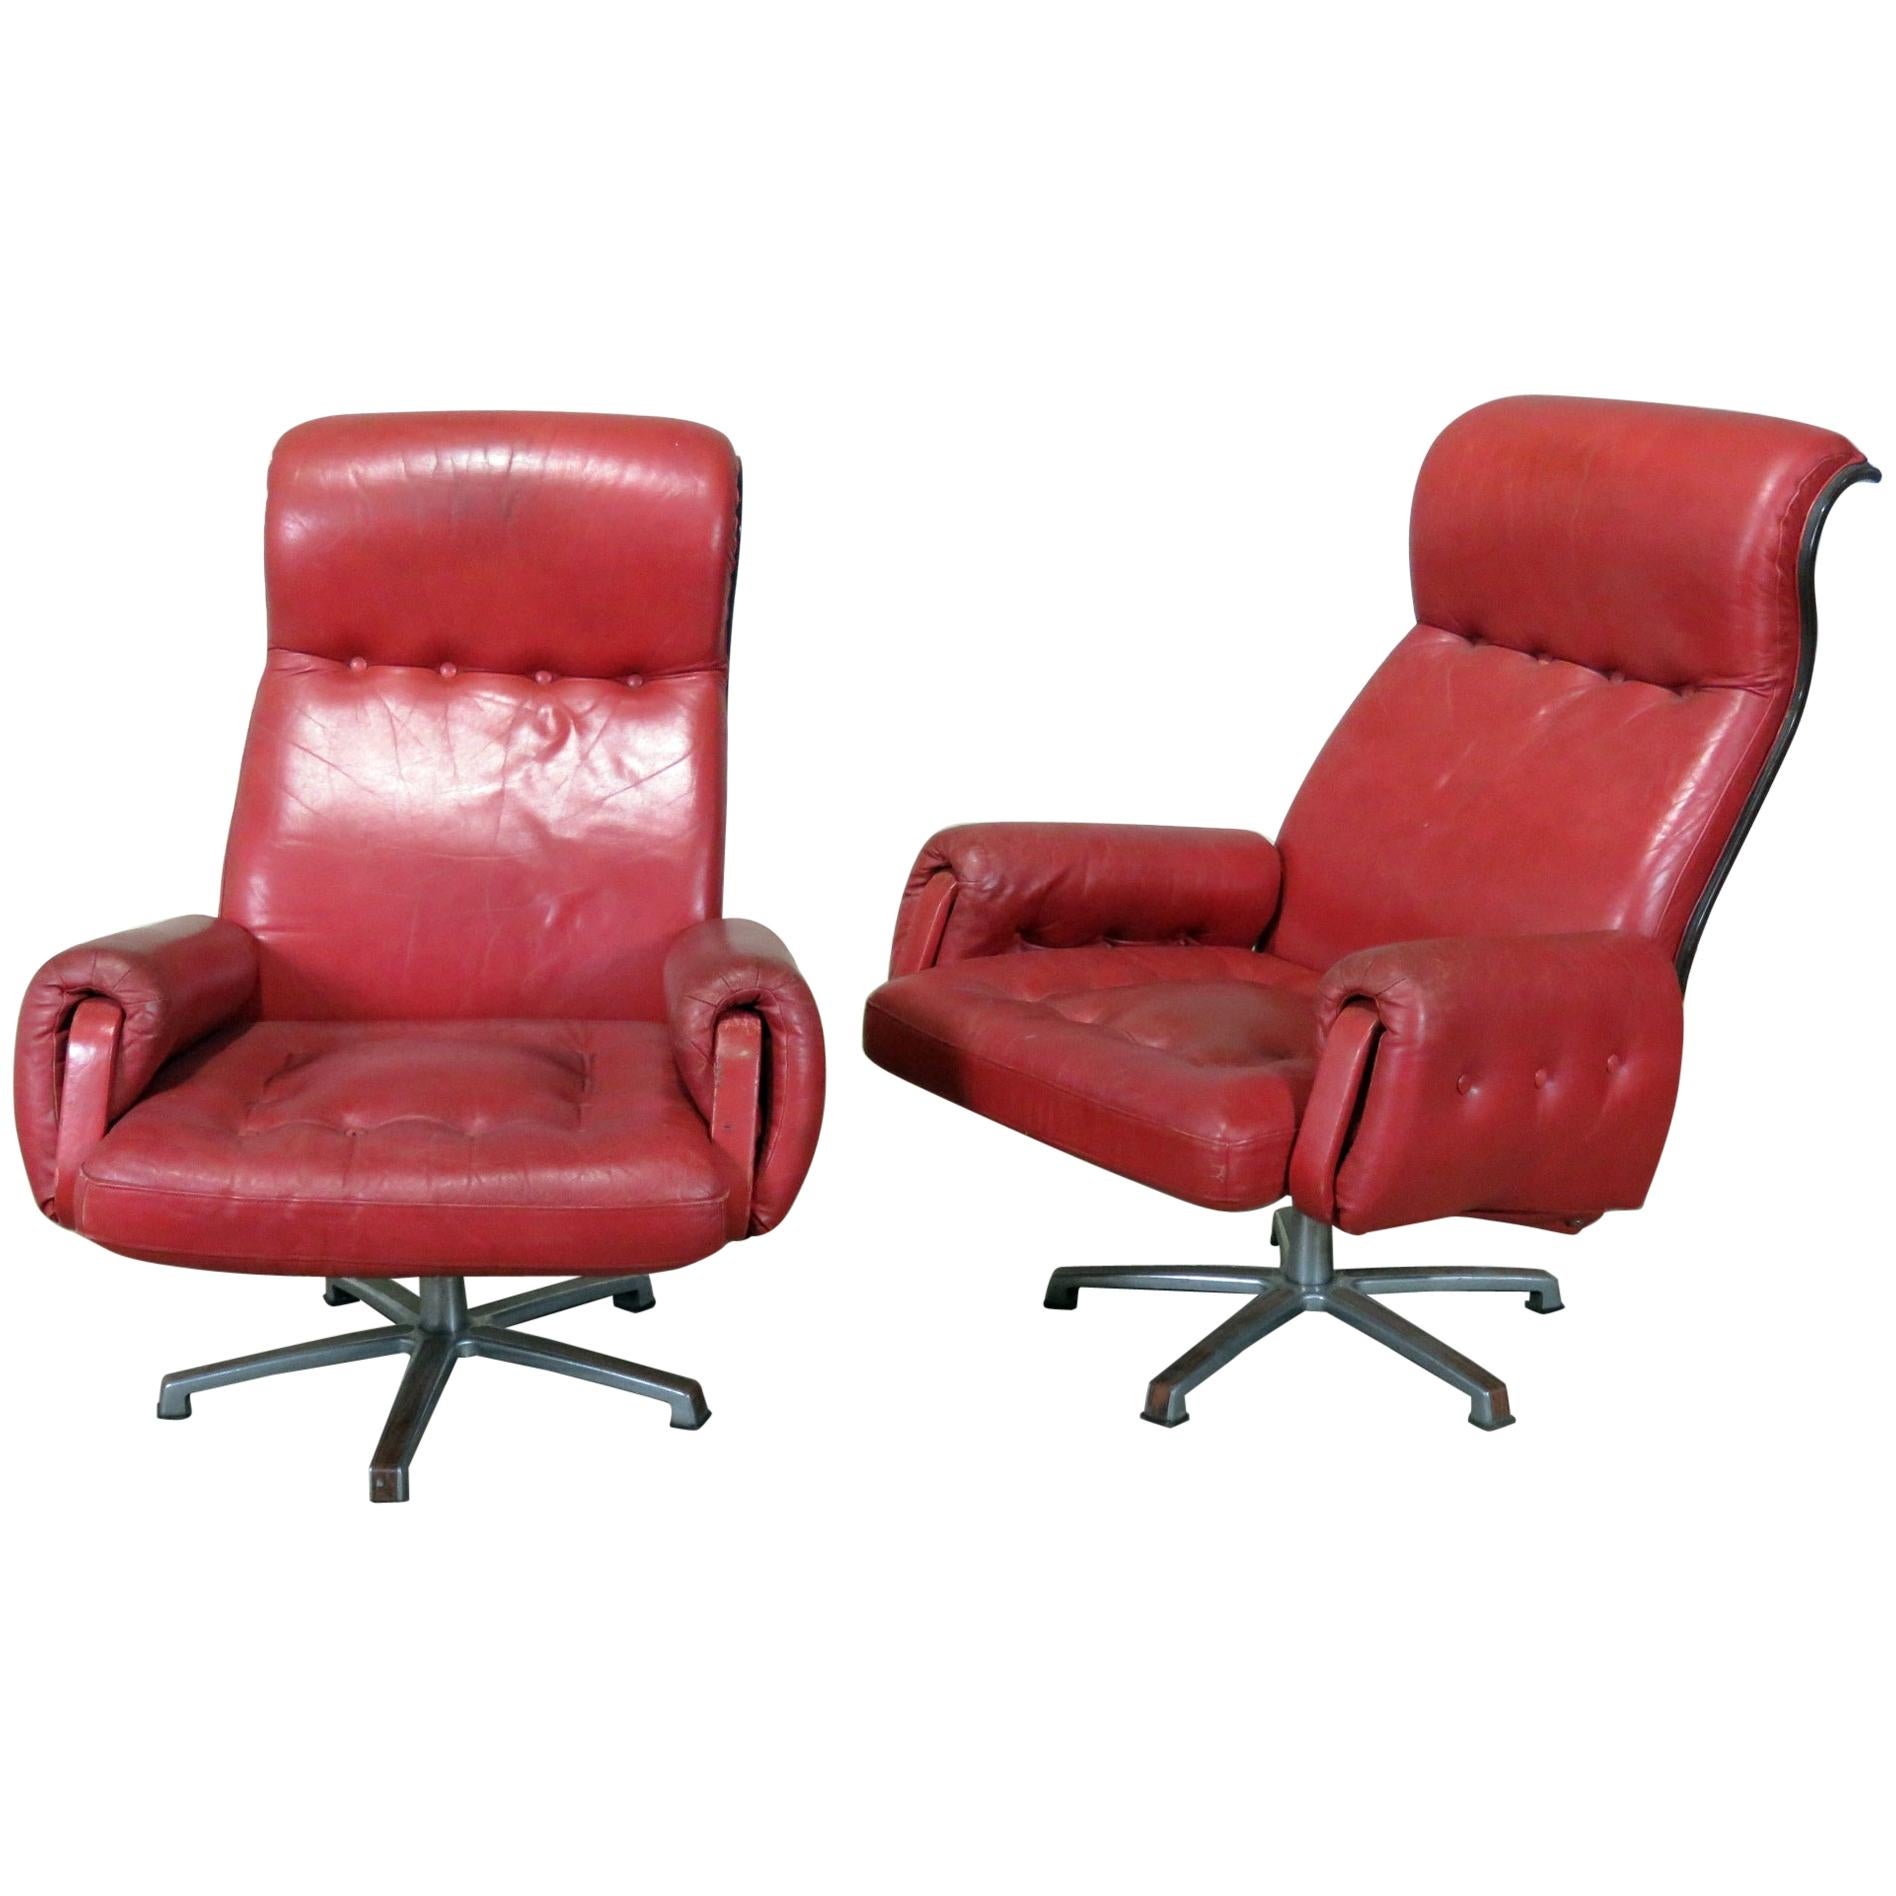 Pair of Mid-Century Modern Swiveling Lounge Chairs